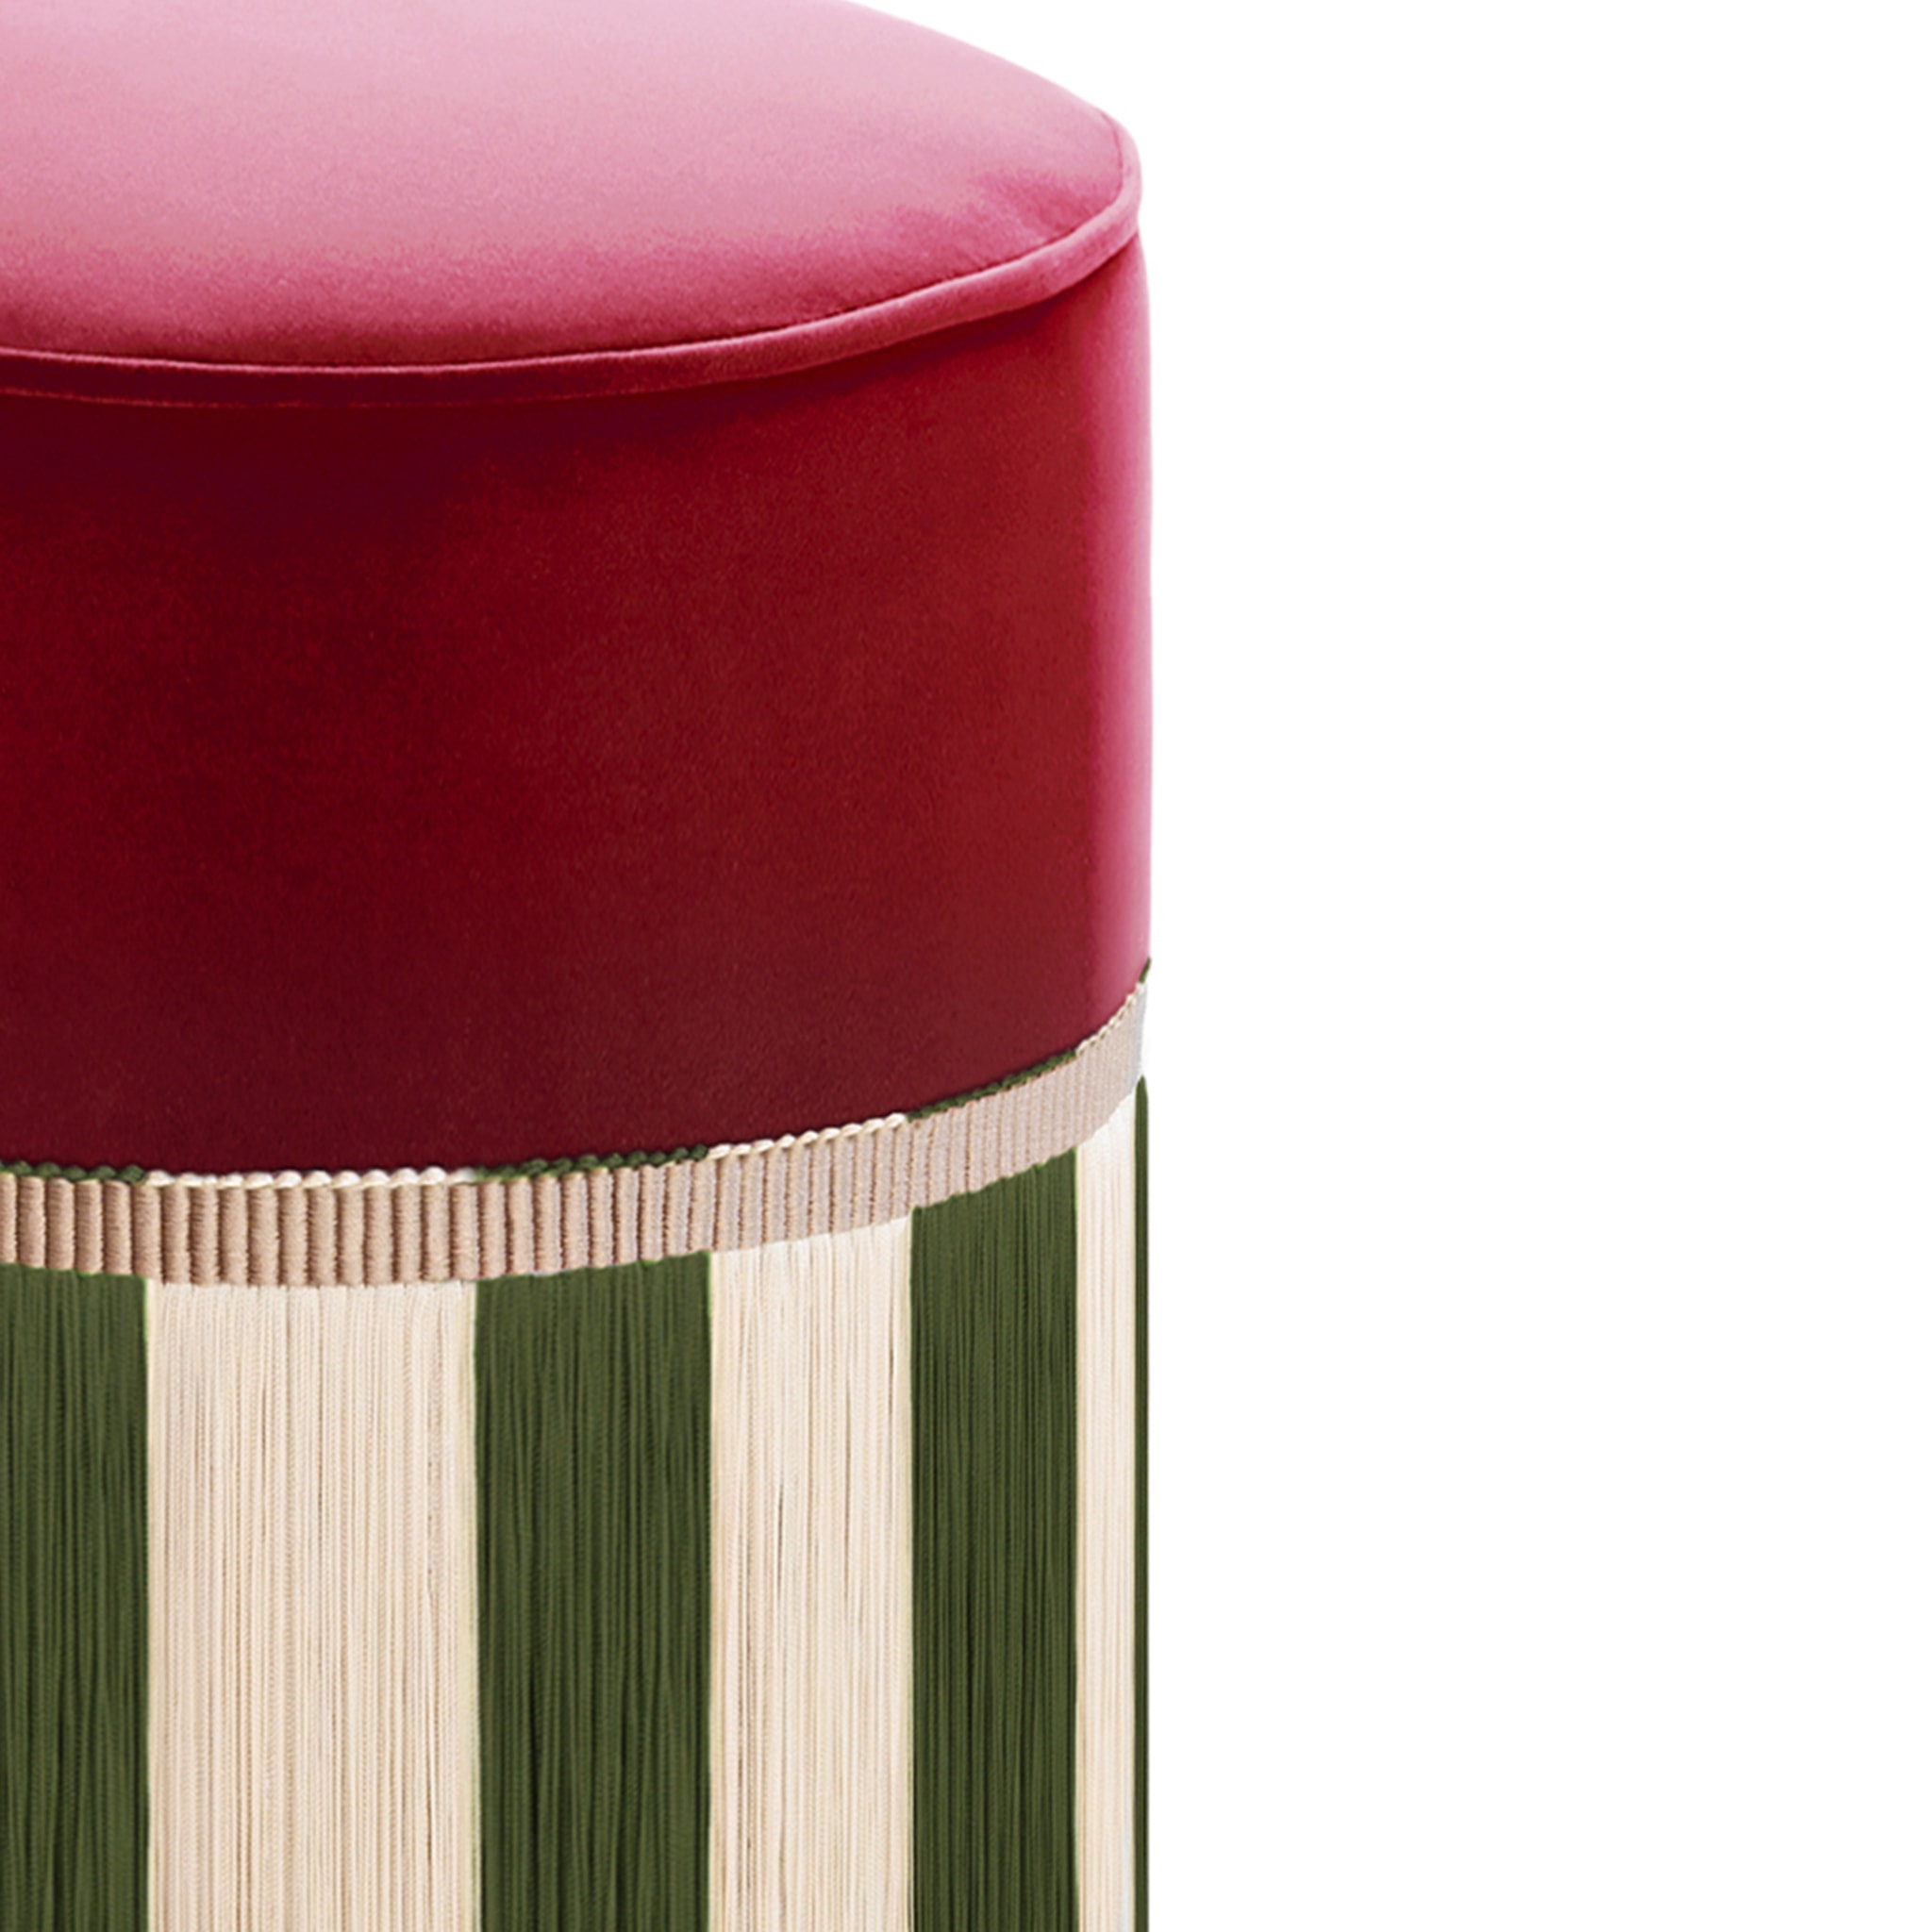 Couture Riga' Fringed Burgundy & Green Ottoman - Alternative view 1